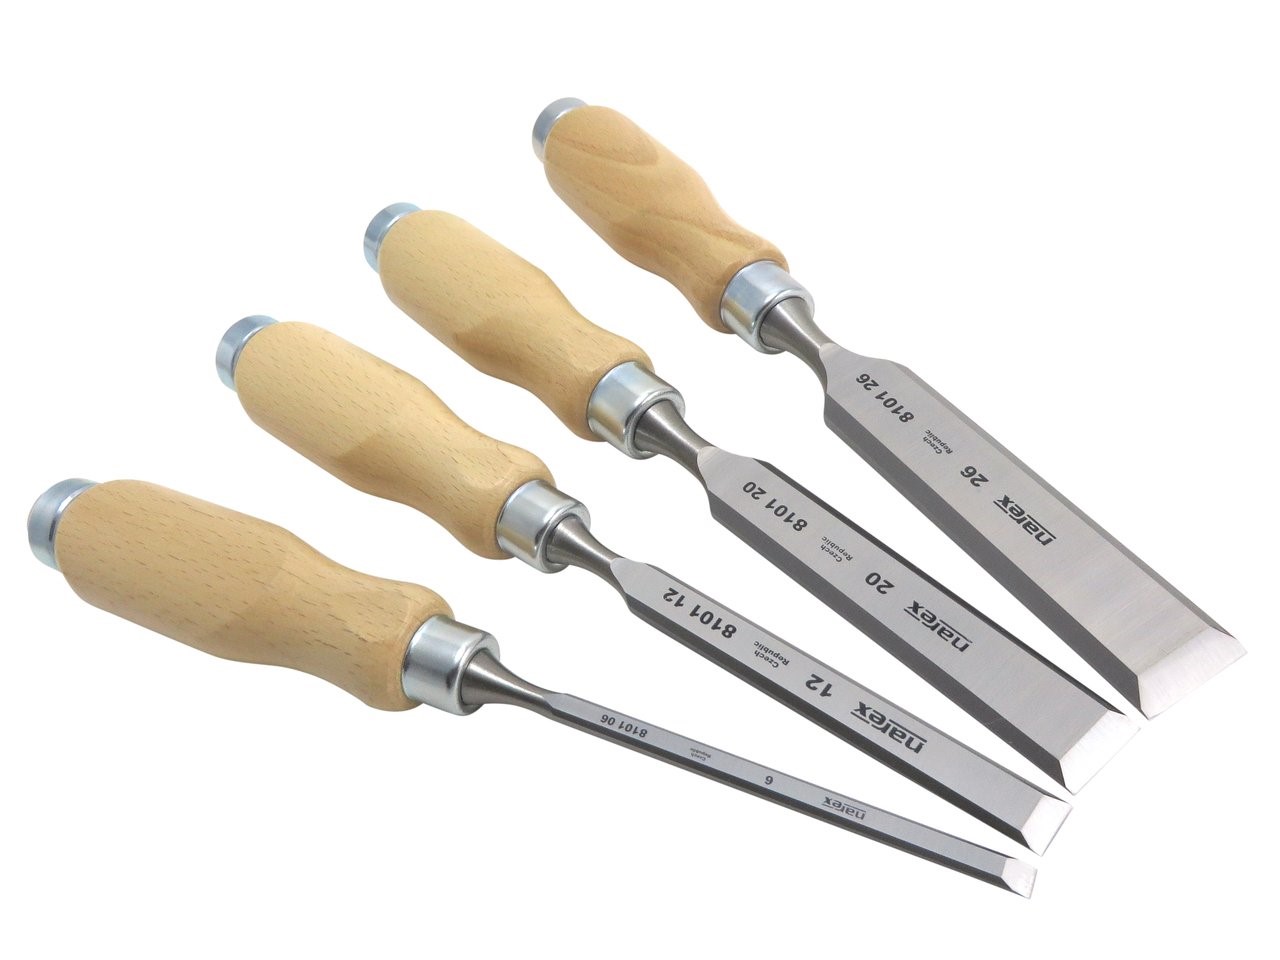 A glowing review of Narex chisels in Australian Woodsmith magazine